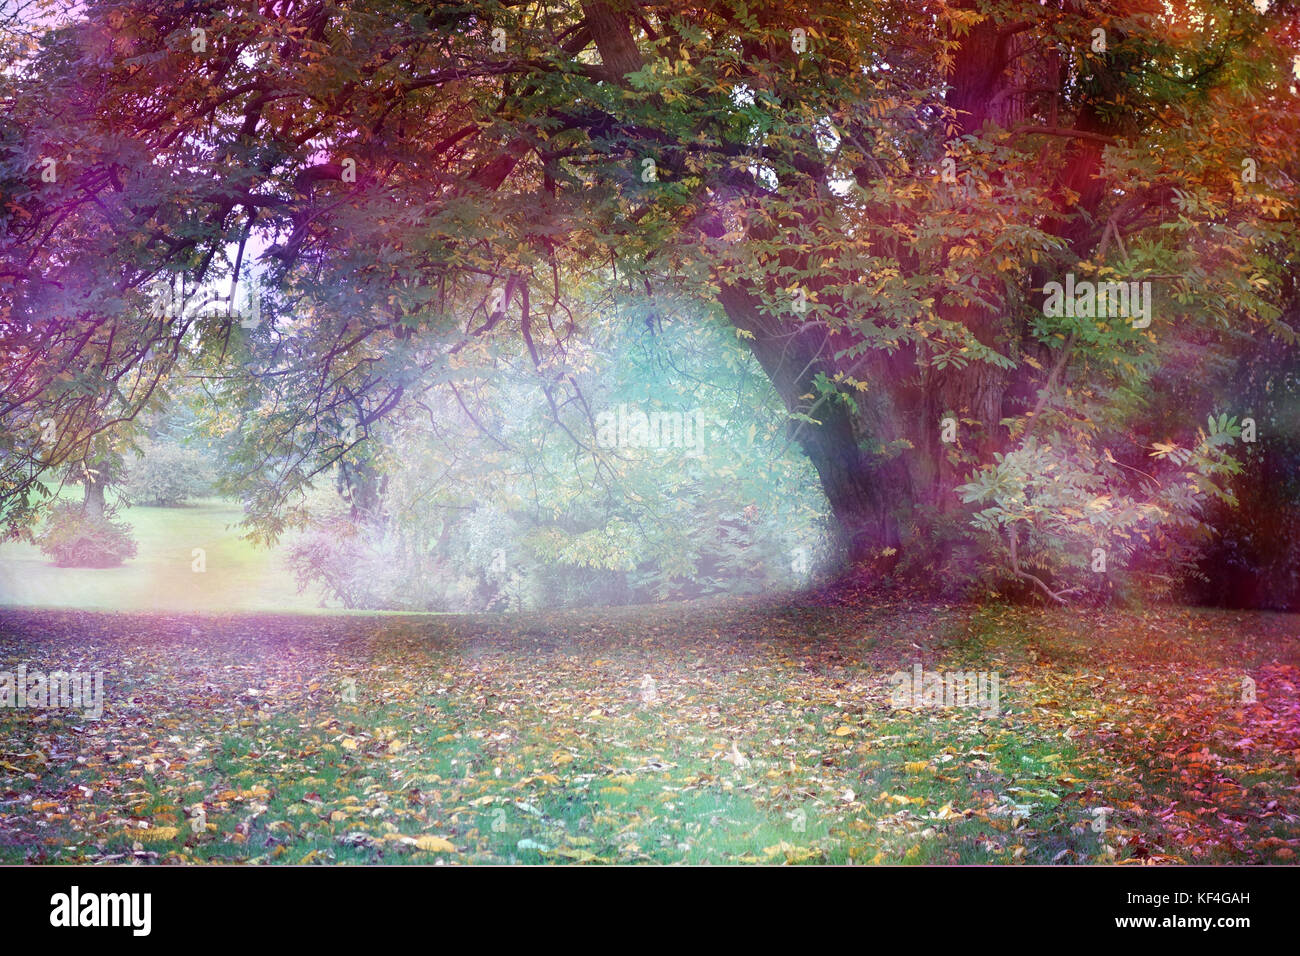 Fantasy Faerie Tree Landscape - Big multicolored tree with large draping branch in an ethereal light  landscape with feminine colors and copy space Stock Photo